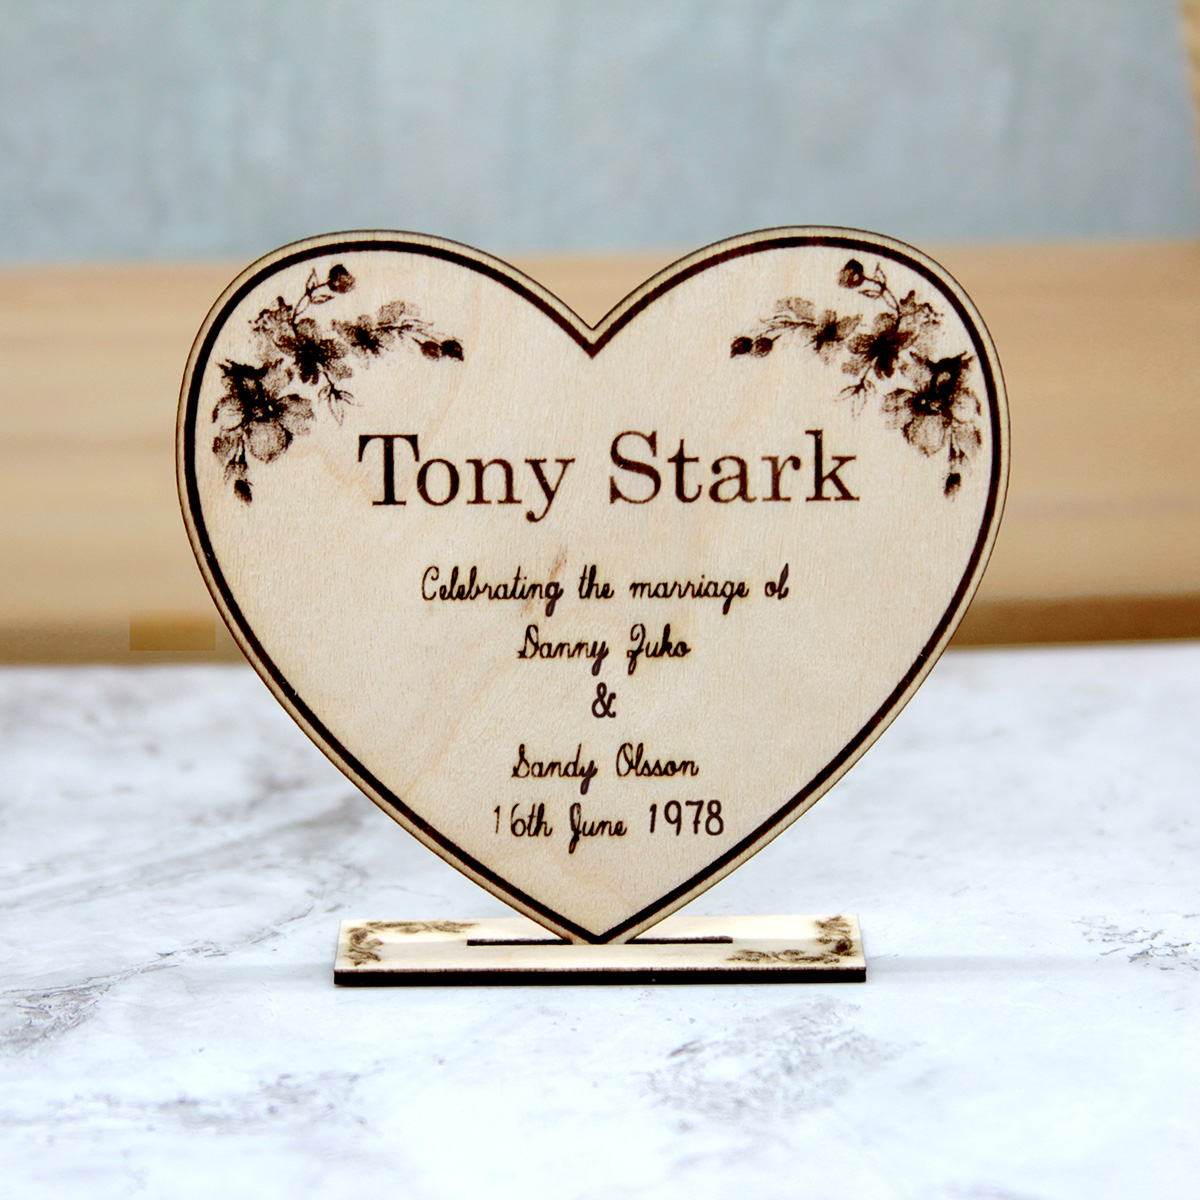 Need to decorate tables for weddings or events? These personalised placeholders are perfect to add extra wow factor! Need a different shape, let us know, we'll work with you to make it happen surefyre.com #weddings #mhhsbd #sbs #warwickshire #events